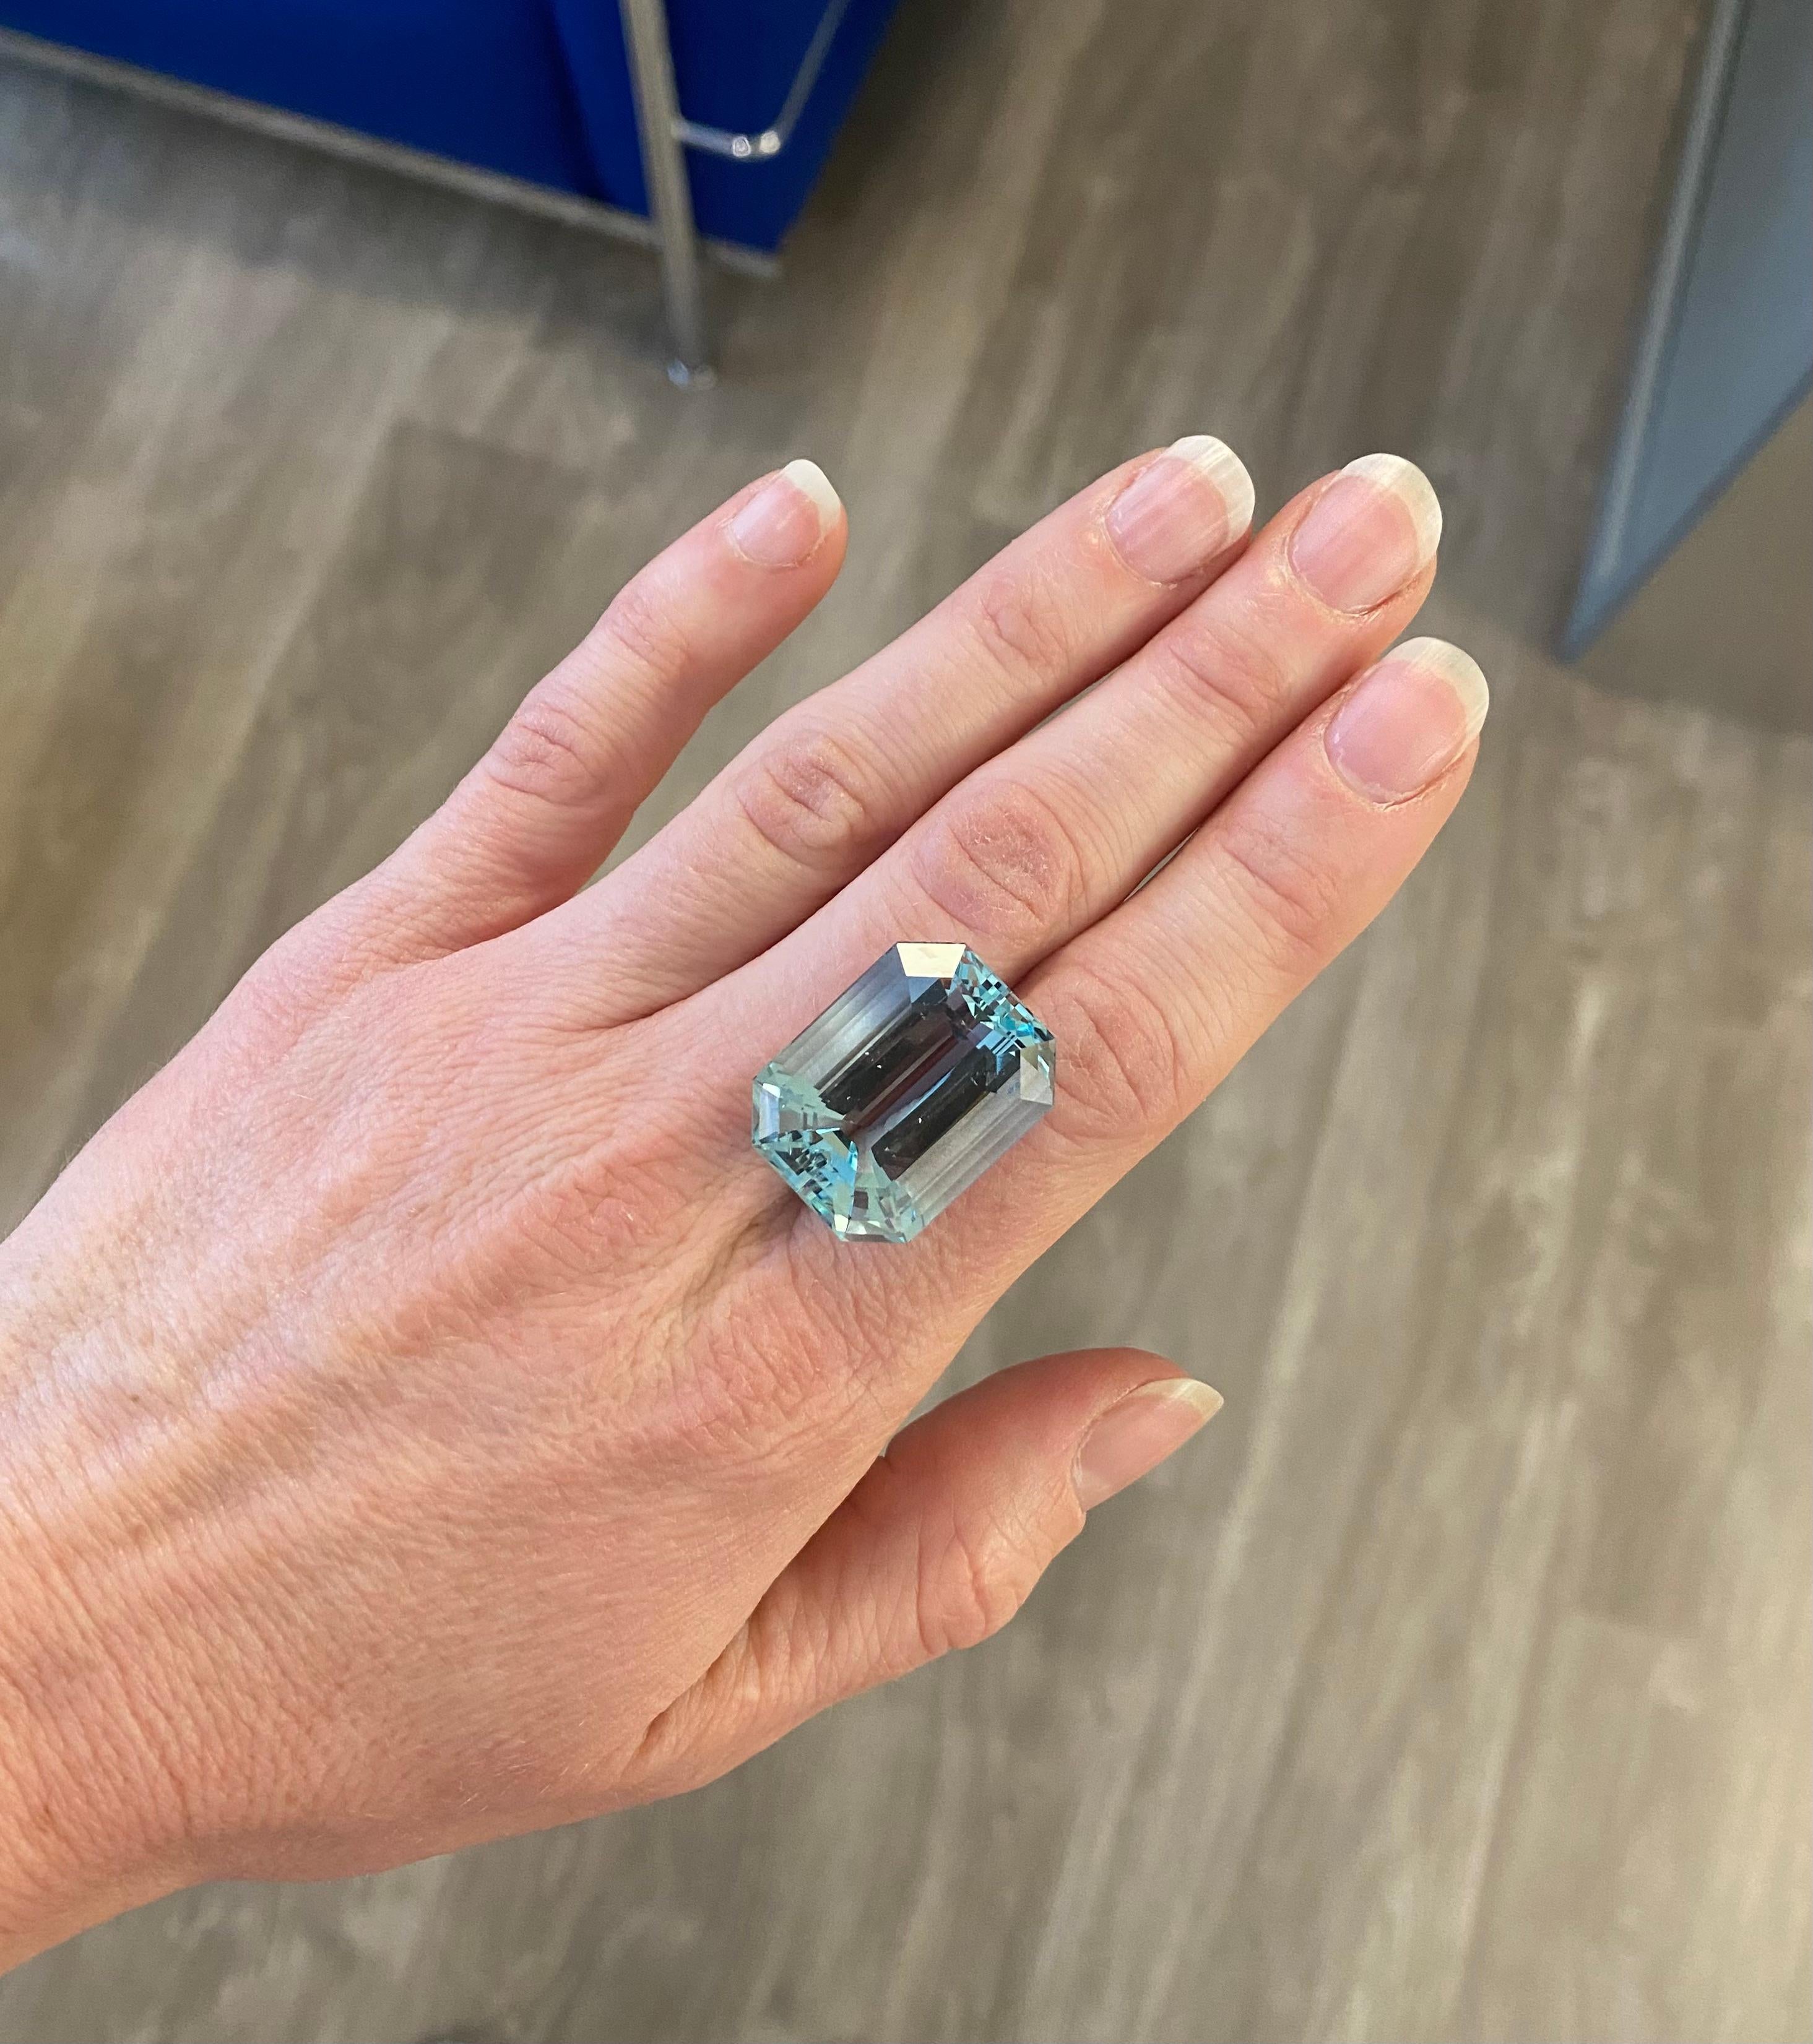 A beautiful emerald cut light blue aquamarine weighing 49.54ct. This stone has been cut in Geneva, and its facets and symmetry are stunning and compliment the beautiful light colour.